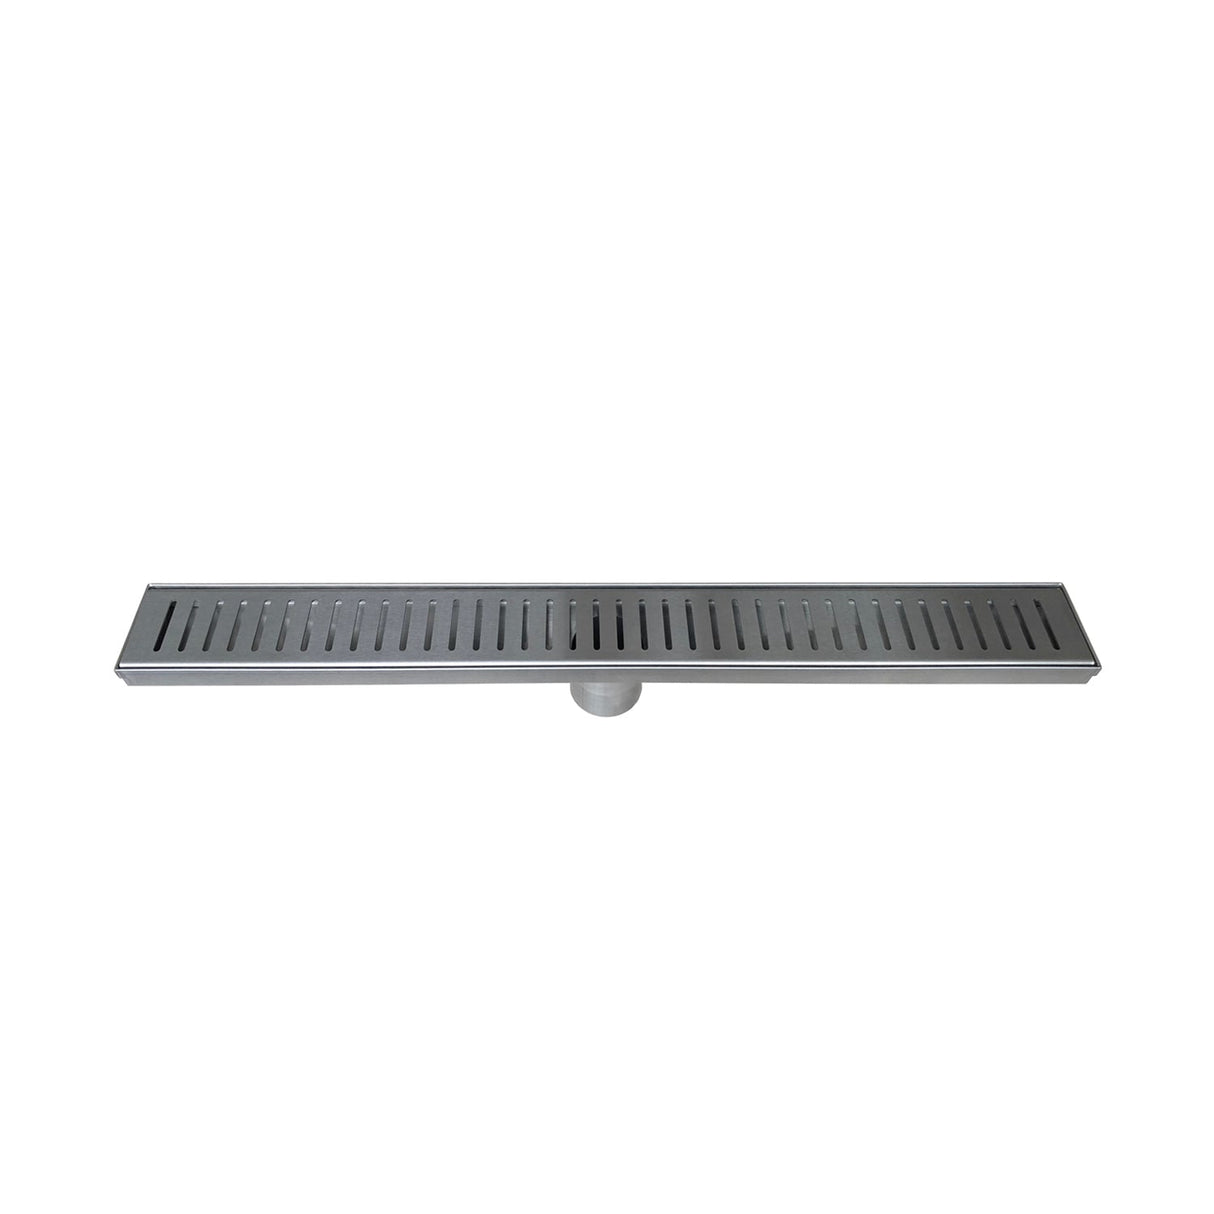 DAX Stainless Steel Rectangular Shower Floor Drain with 18 Gauge, 36", Polished DR36-G06